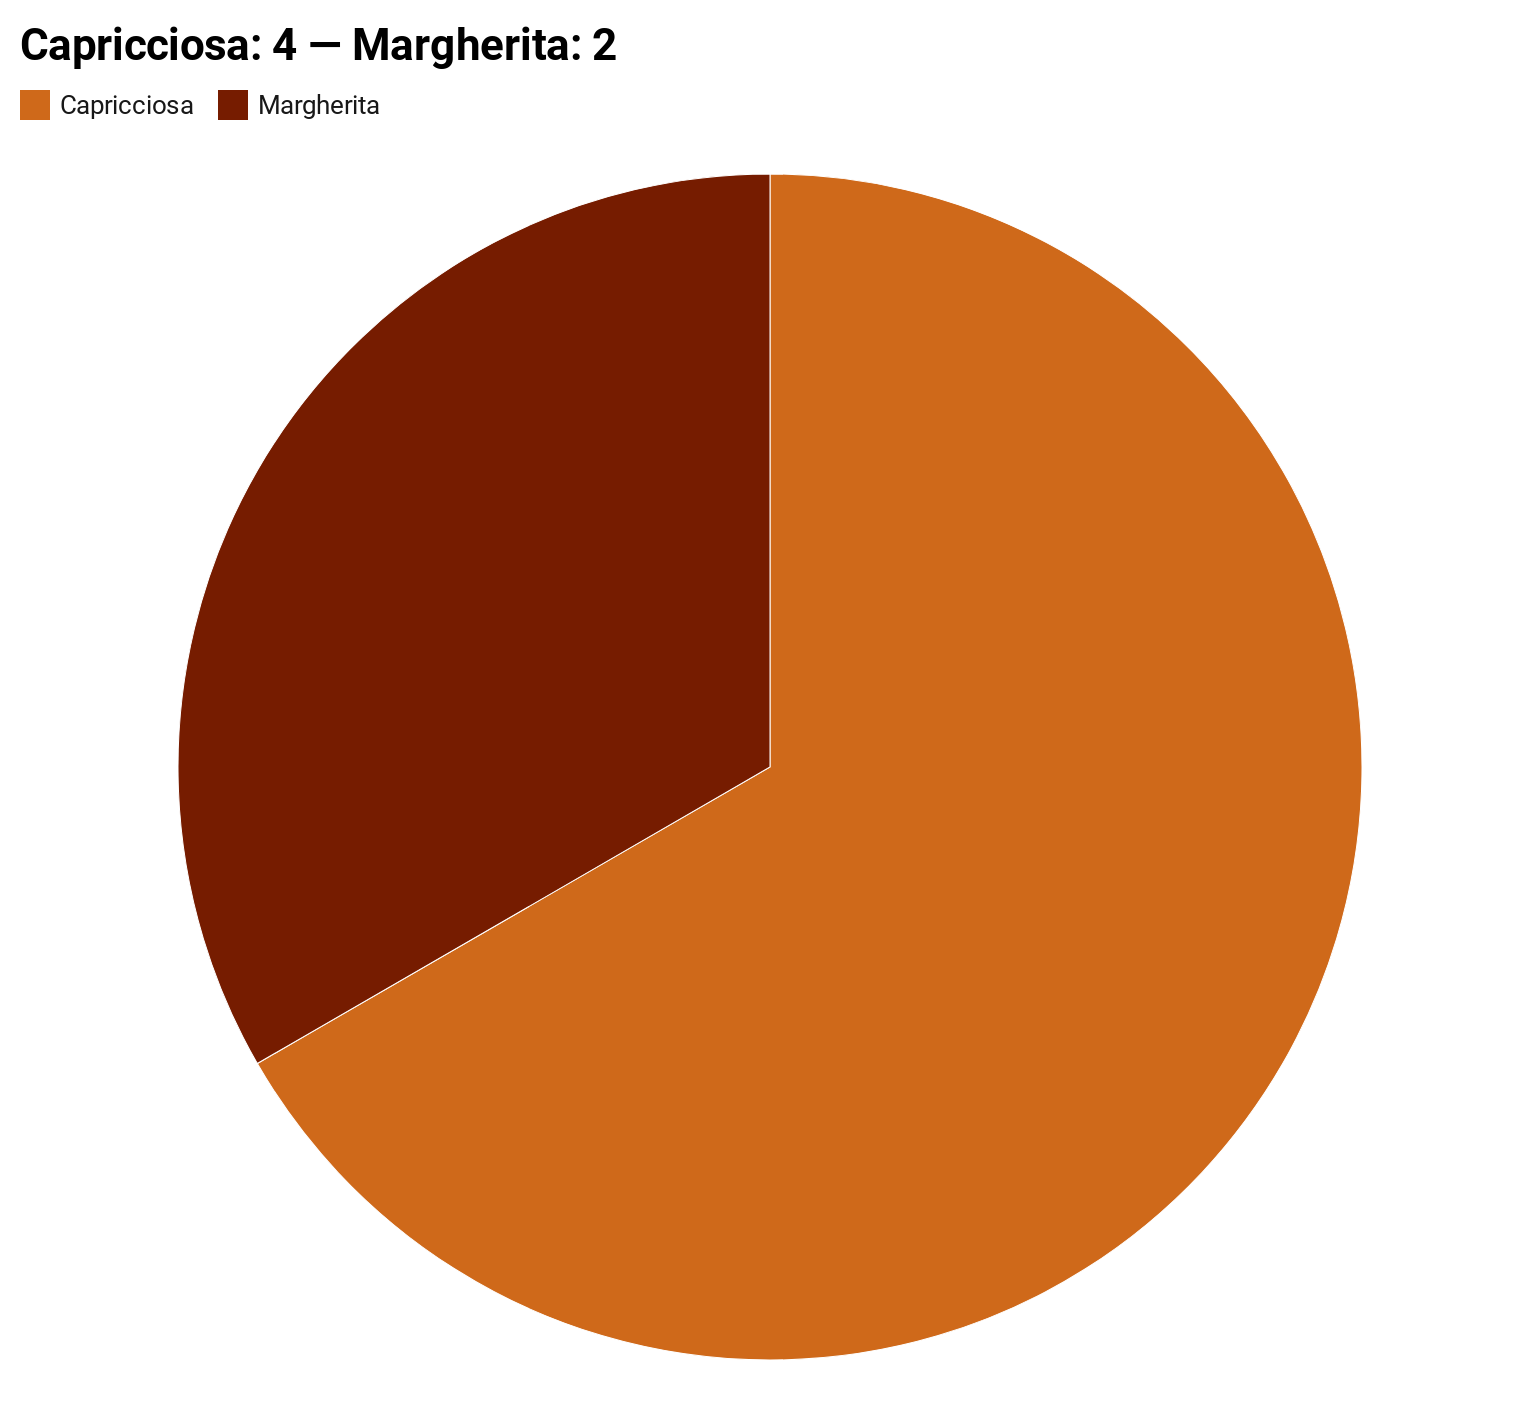 Pie chart shows more than a quarter slice (2) for Margherita and an almost three-quarter slice (4) for capricciosa